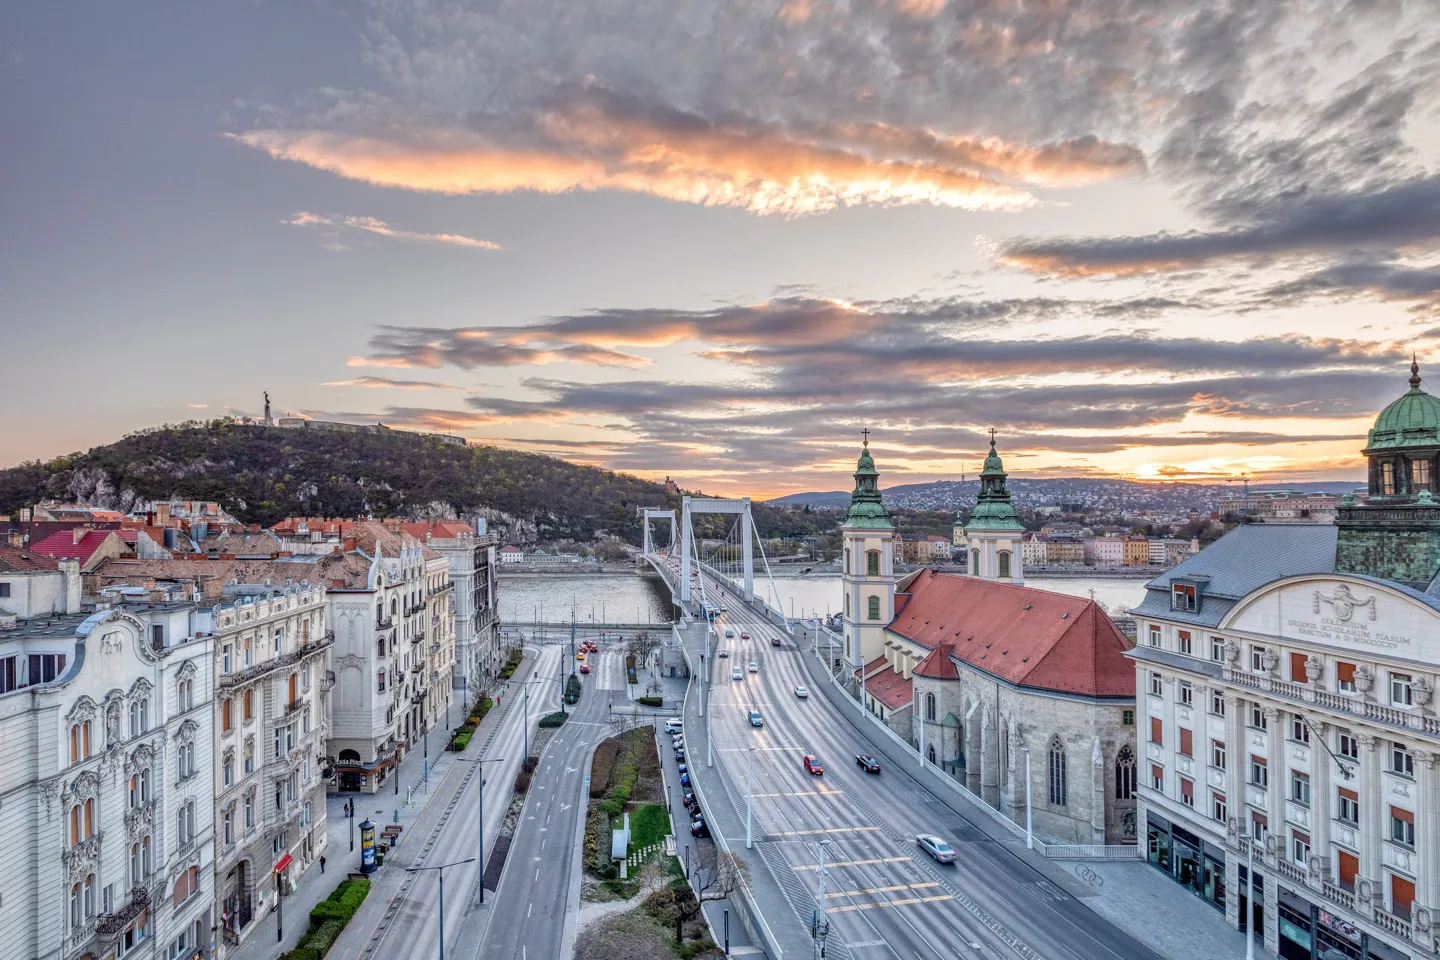 Explore the picturesque city of Budapest as part of your Hungarian F1 long weekend hospitality